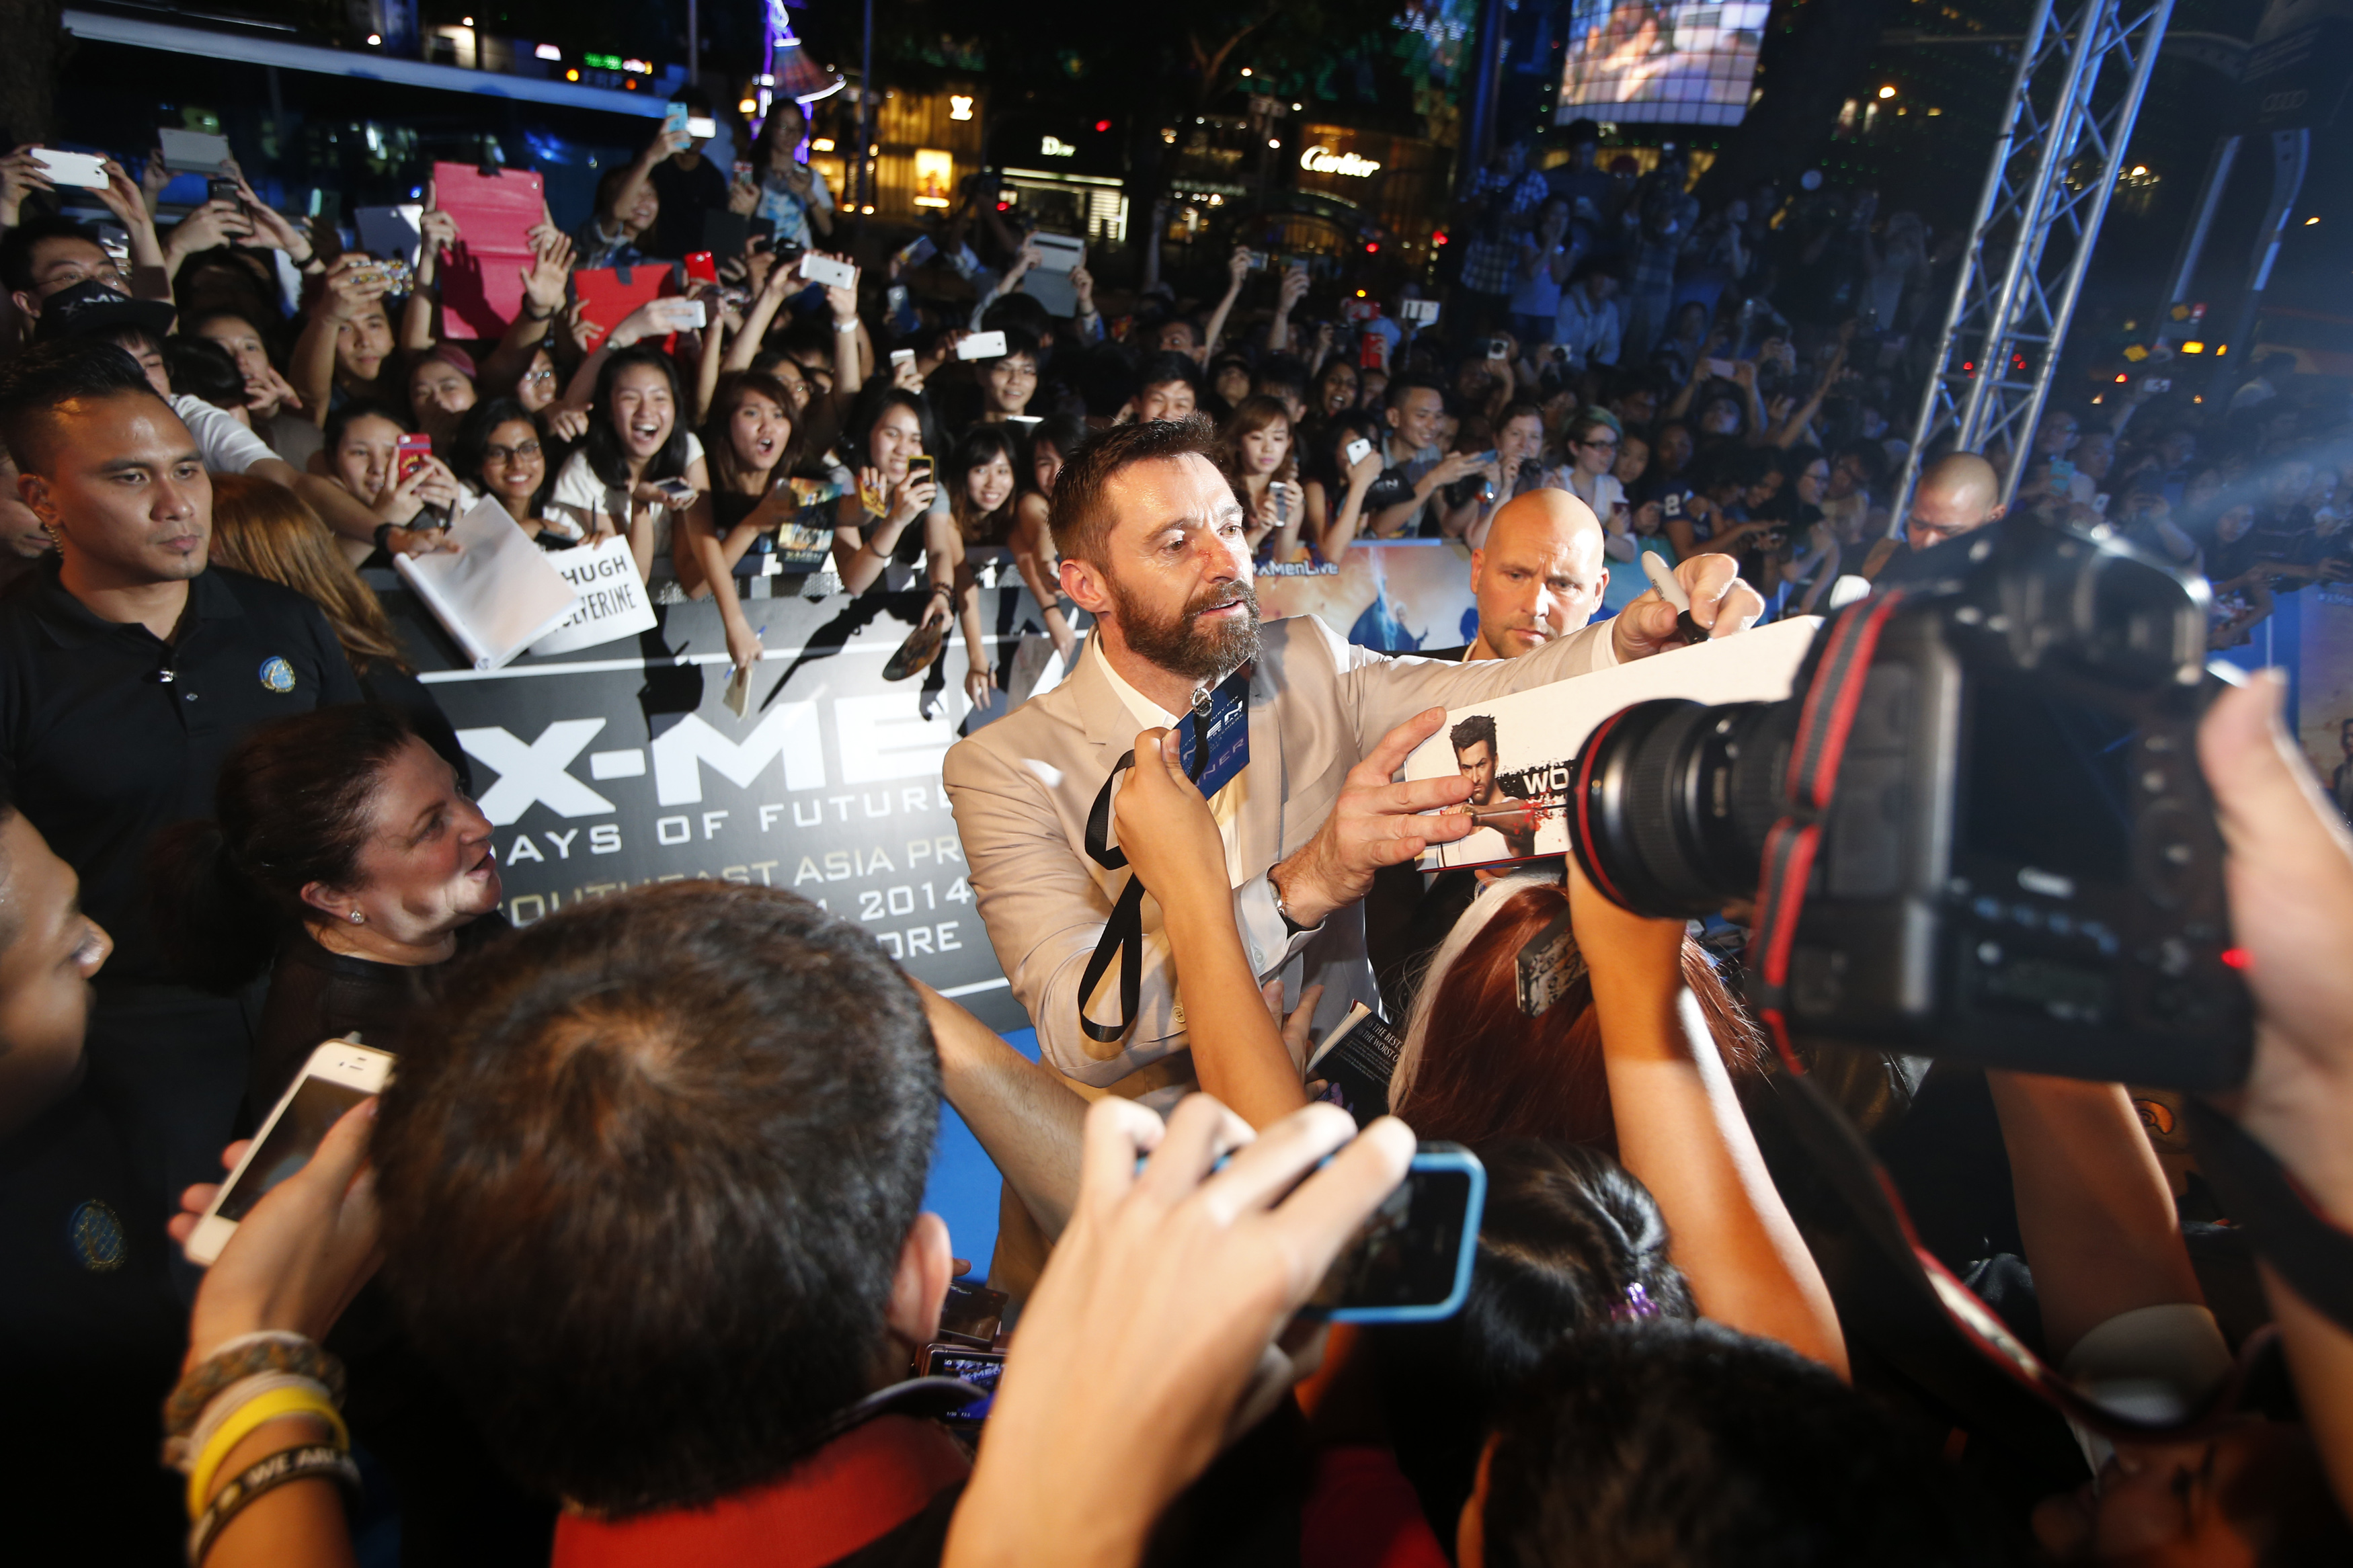 Cast member Hugh Jackman signs autographs for fans at the Southeast Asia premiere of <i>X-Men: Days of Future Past</i> in Singapore on May 14, 2014 (Edgar Su—Reuters)